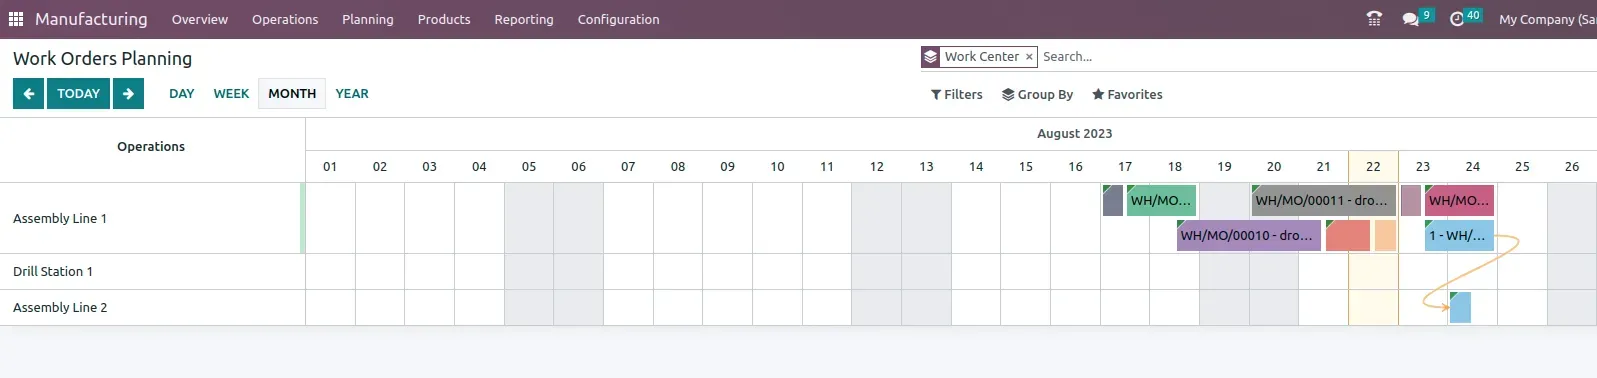 Odoo Manufacturing - Workorder planning by workcenter